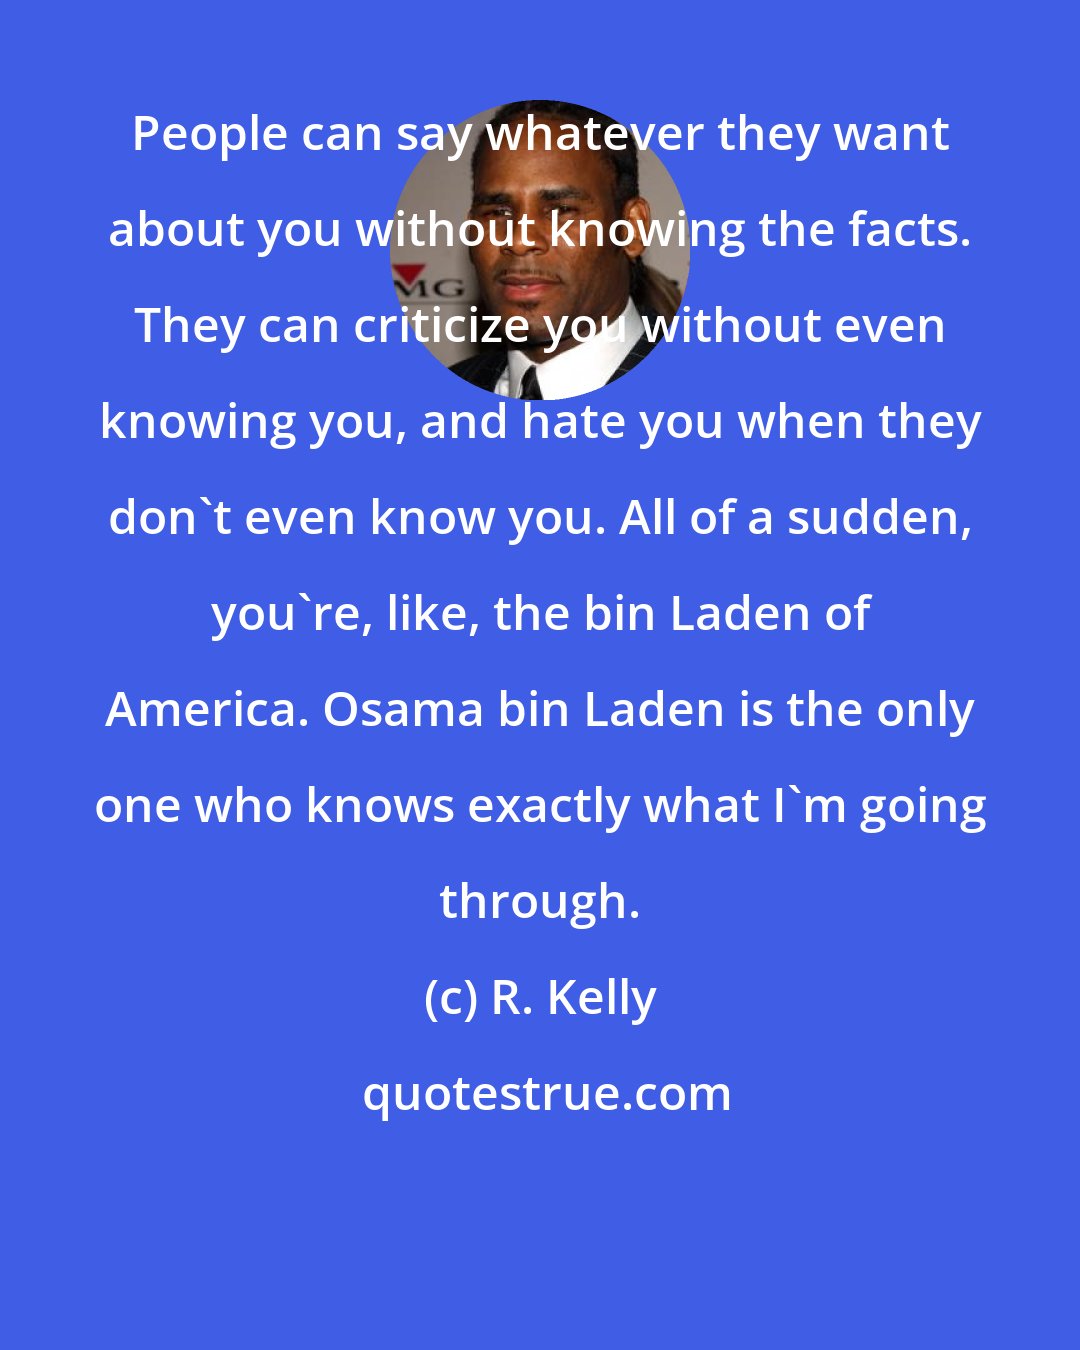 R. Kelly: People can say whatever they want about you without knowing the facts. They can criticize you without even knowing you, and hate you when they don't even know you. All of a sudden, you're, like, the bin Laden of America. Osama bin Laden is the only one who knows exactly what I'm going through.